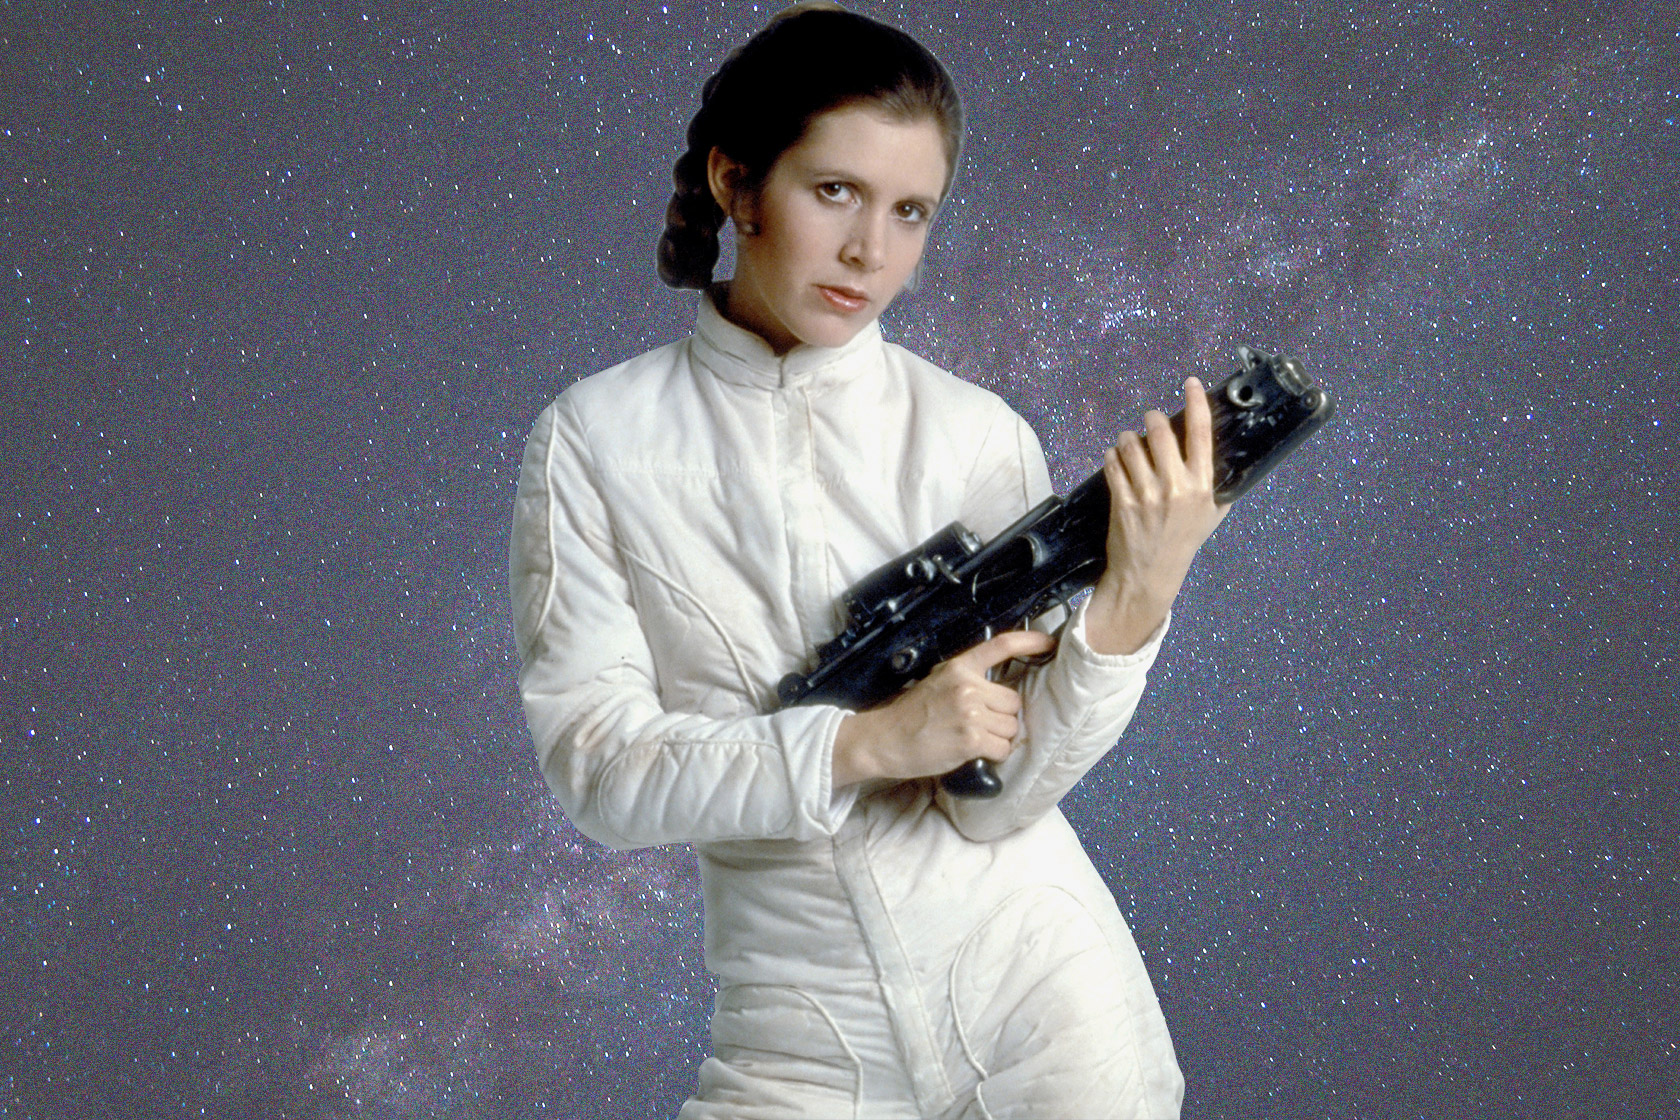 Star Wars fans, this is why Princess Leia’s feminist legacy will never die....